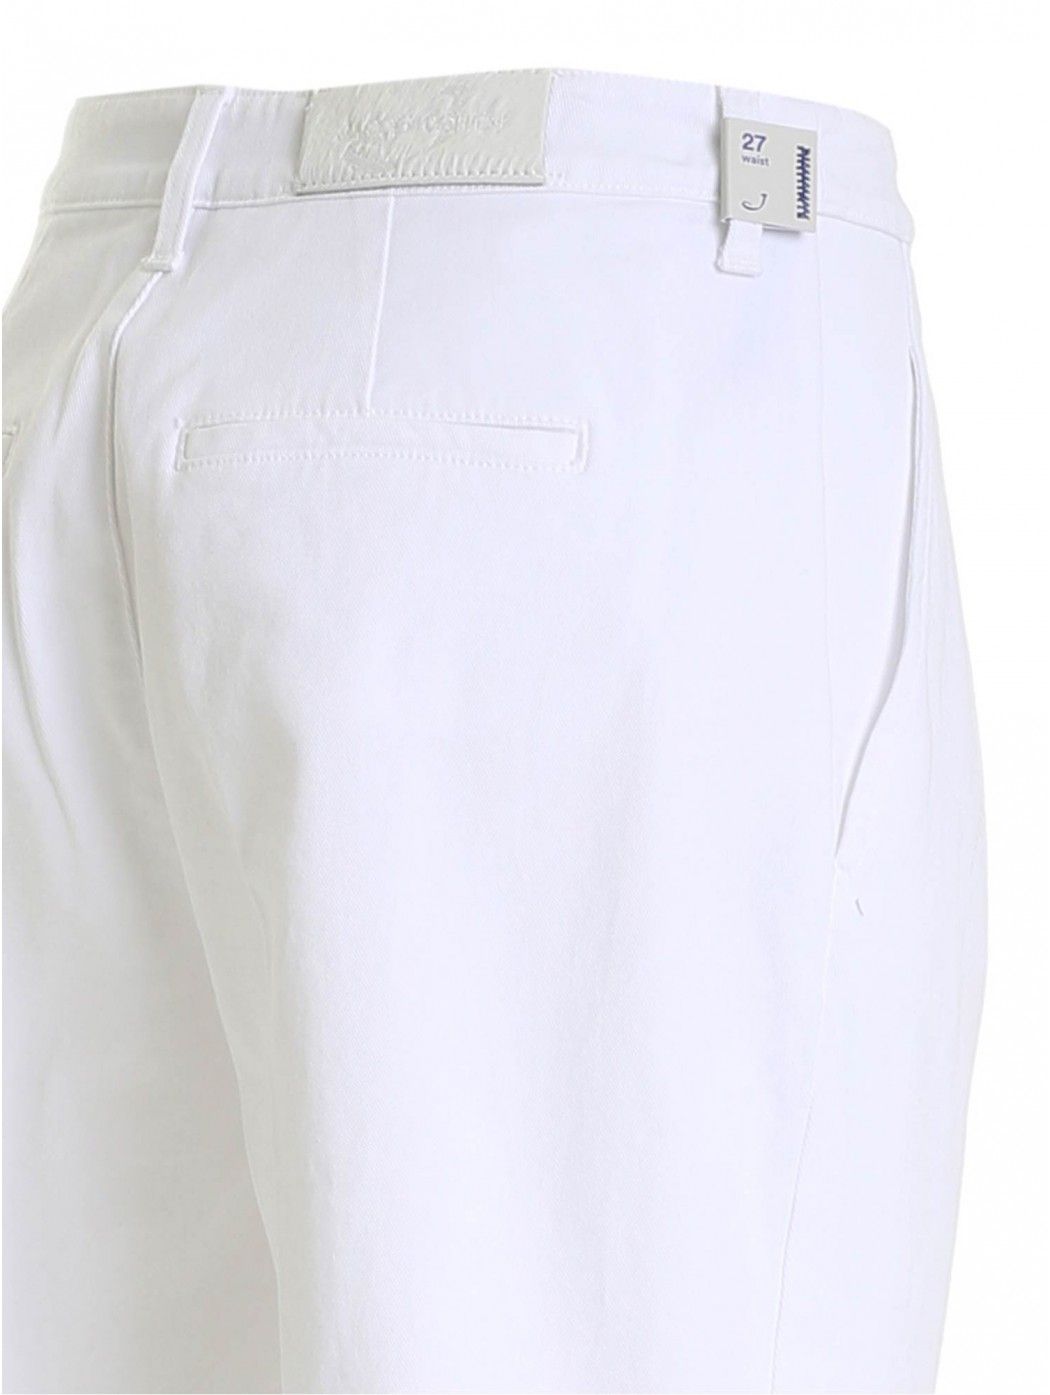 CHINO PPT STR SOLID JACOB COHEN DONNA LINETTE01908S 111